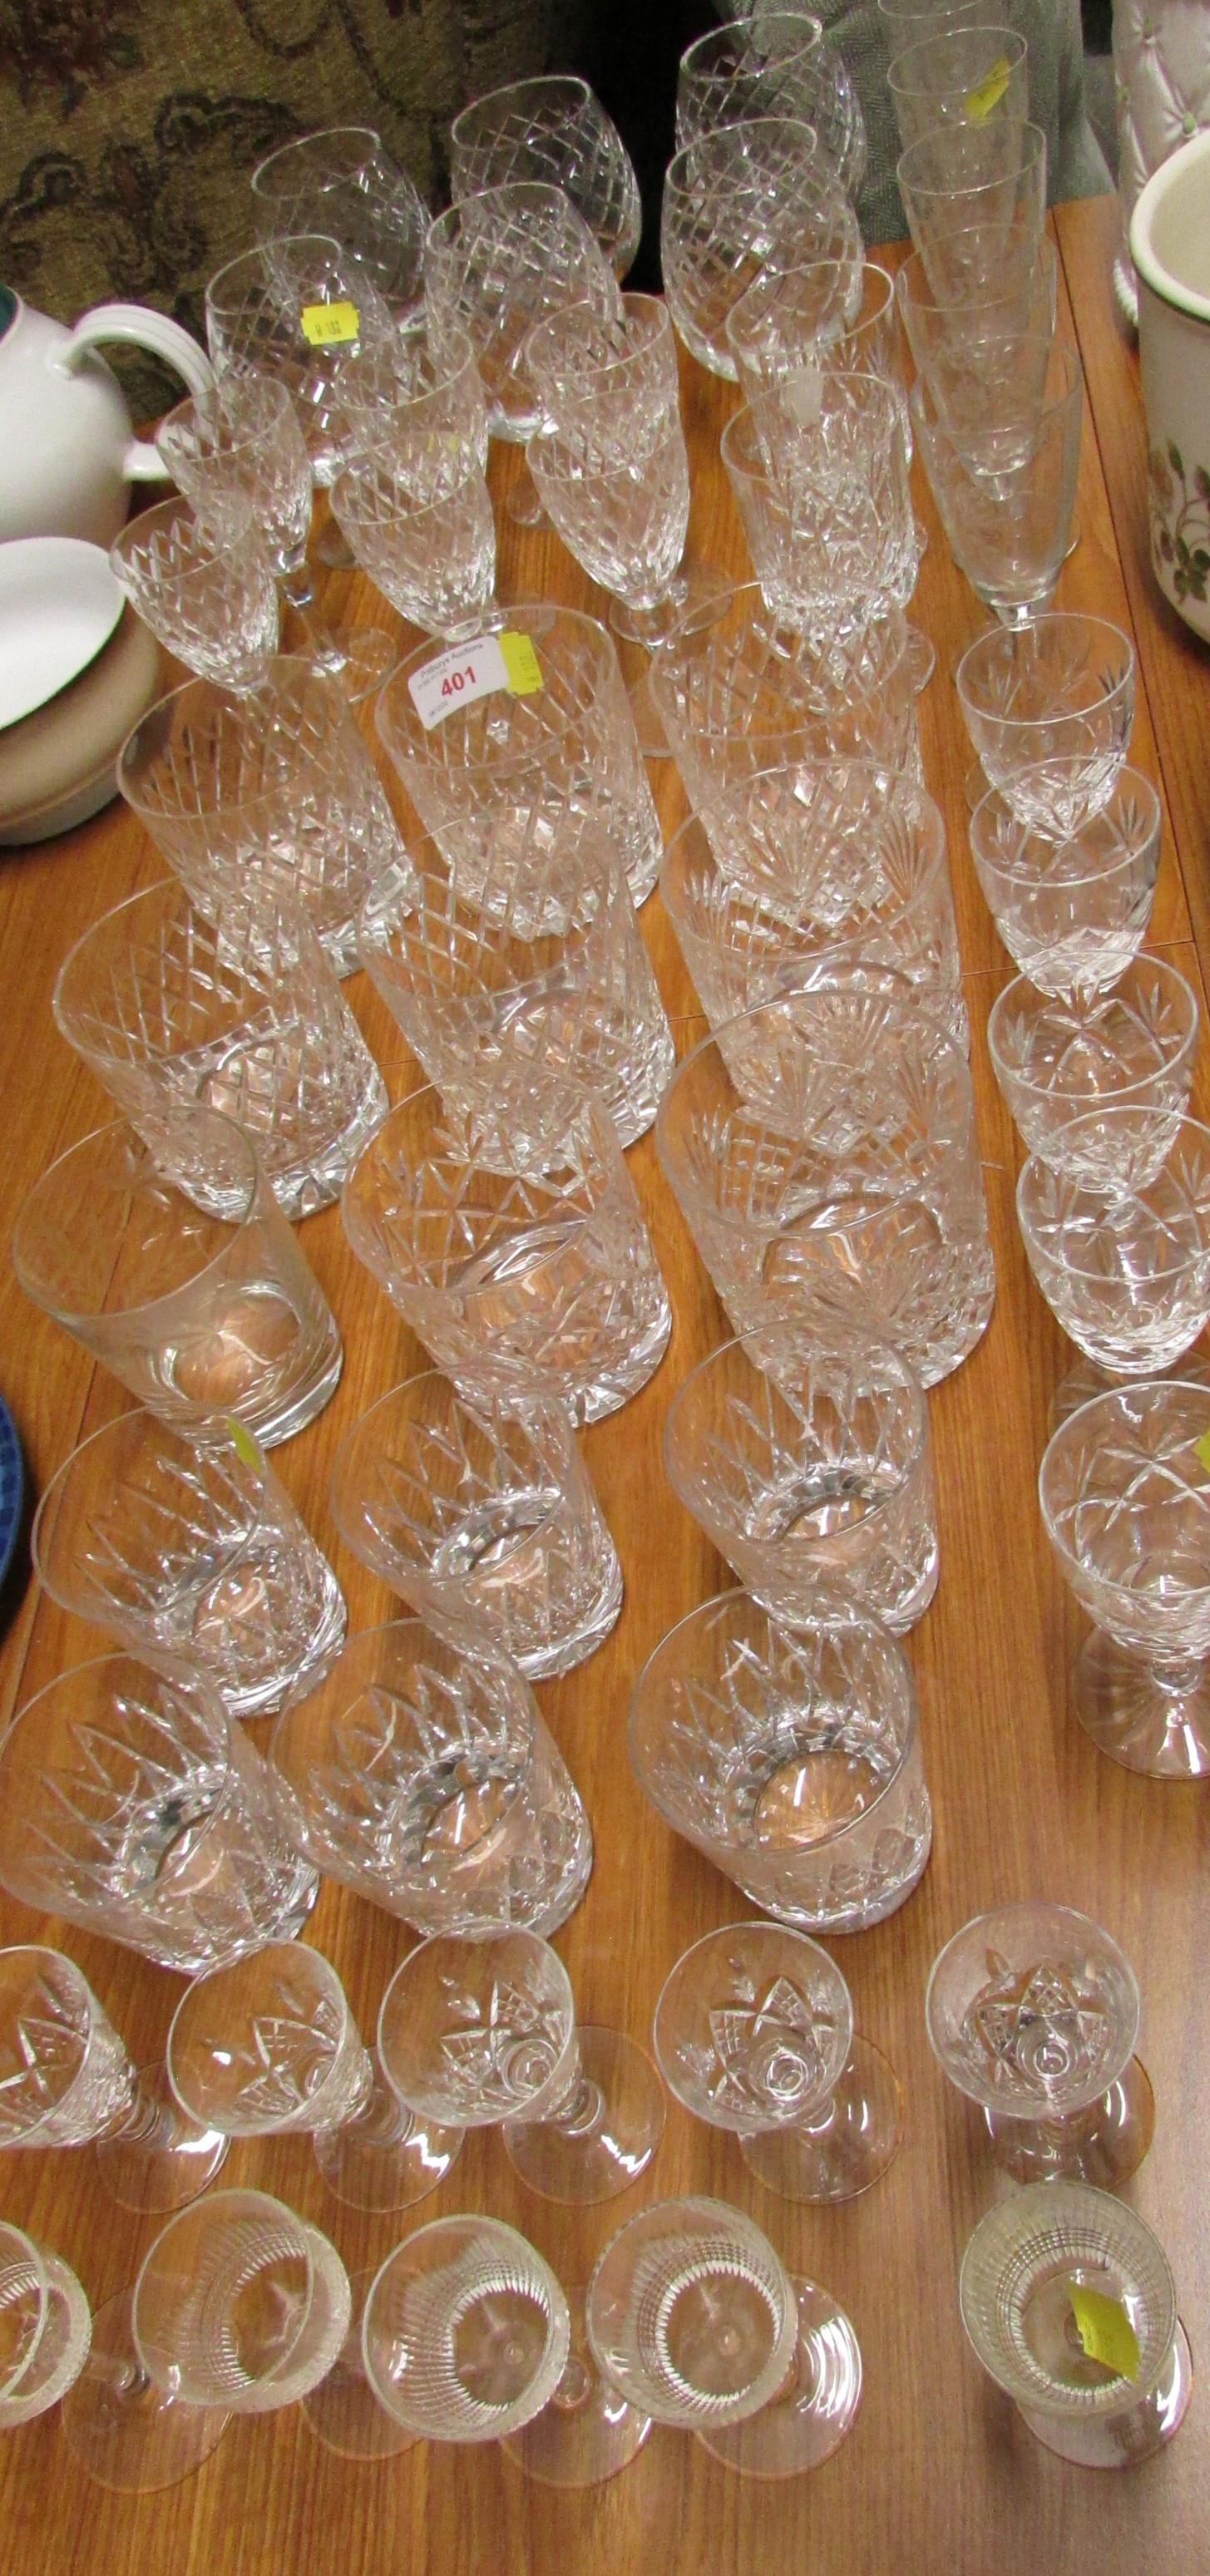 CUT GLASS DRINKING GLASSES INCLUDING ROYAL BRIERLEY BRANDY GLASSES, TUMBLERS AND SMALL WINE GLASSES